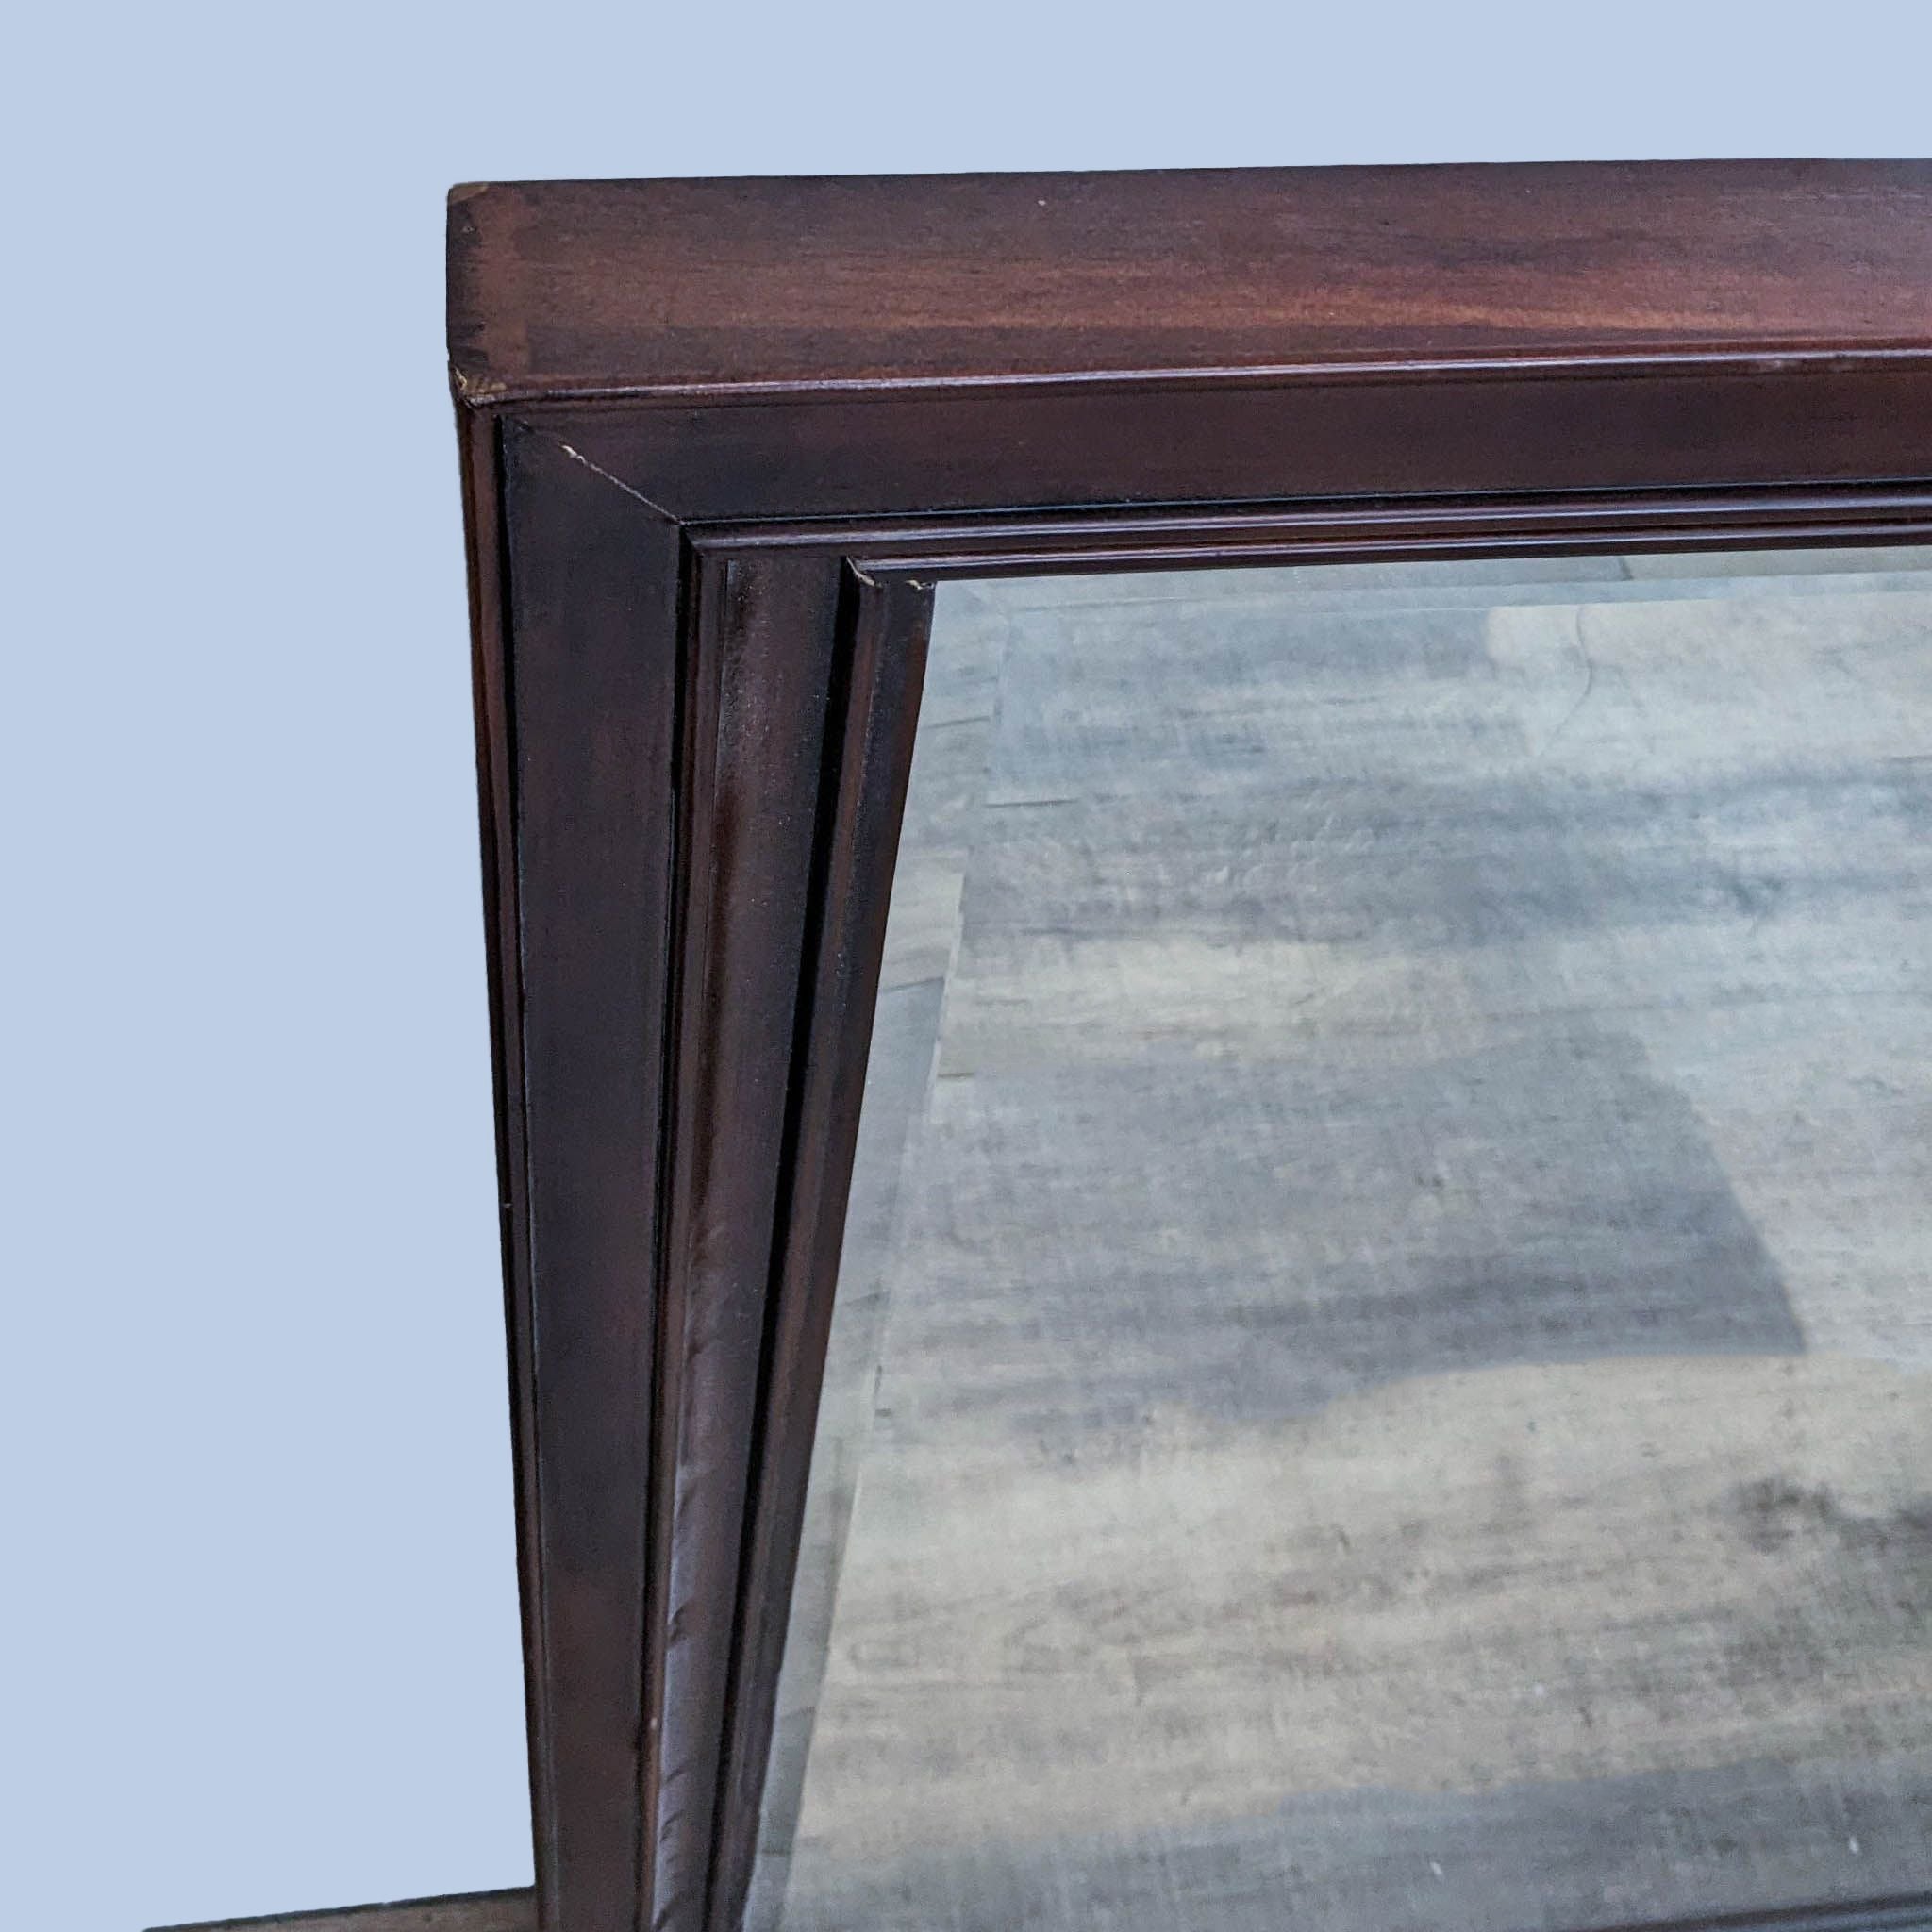 Close-up of Reperch mirror's corner, showcasing the classic wood frame's beveled design and rich finish.